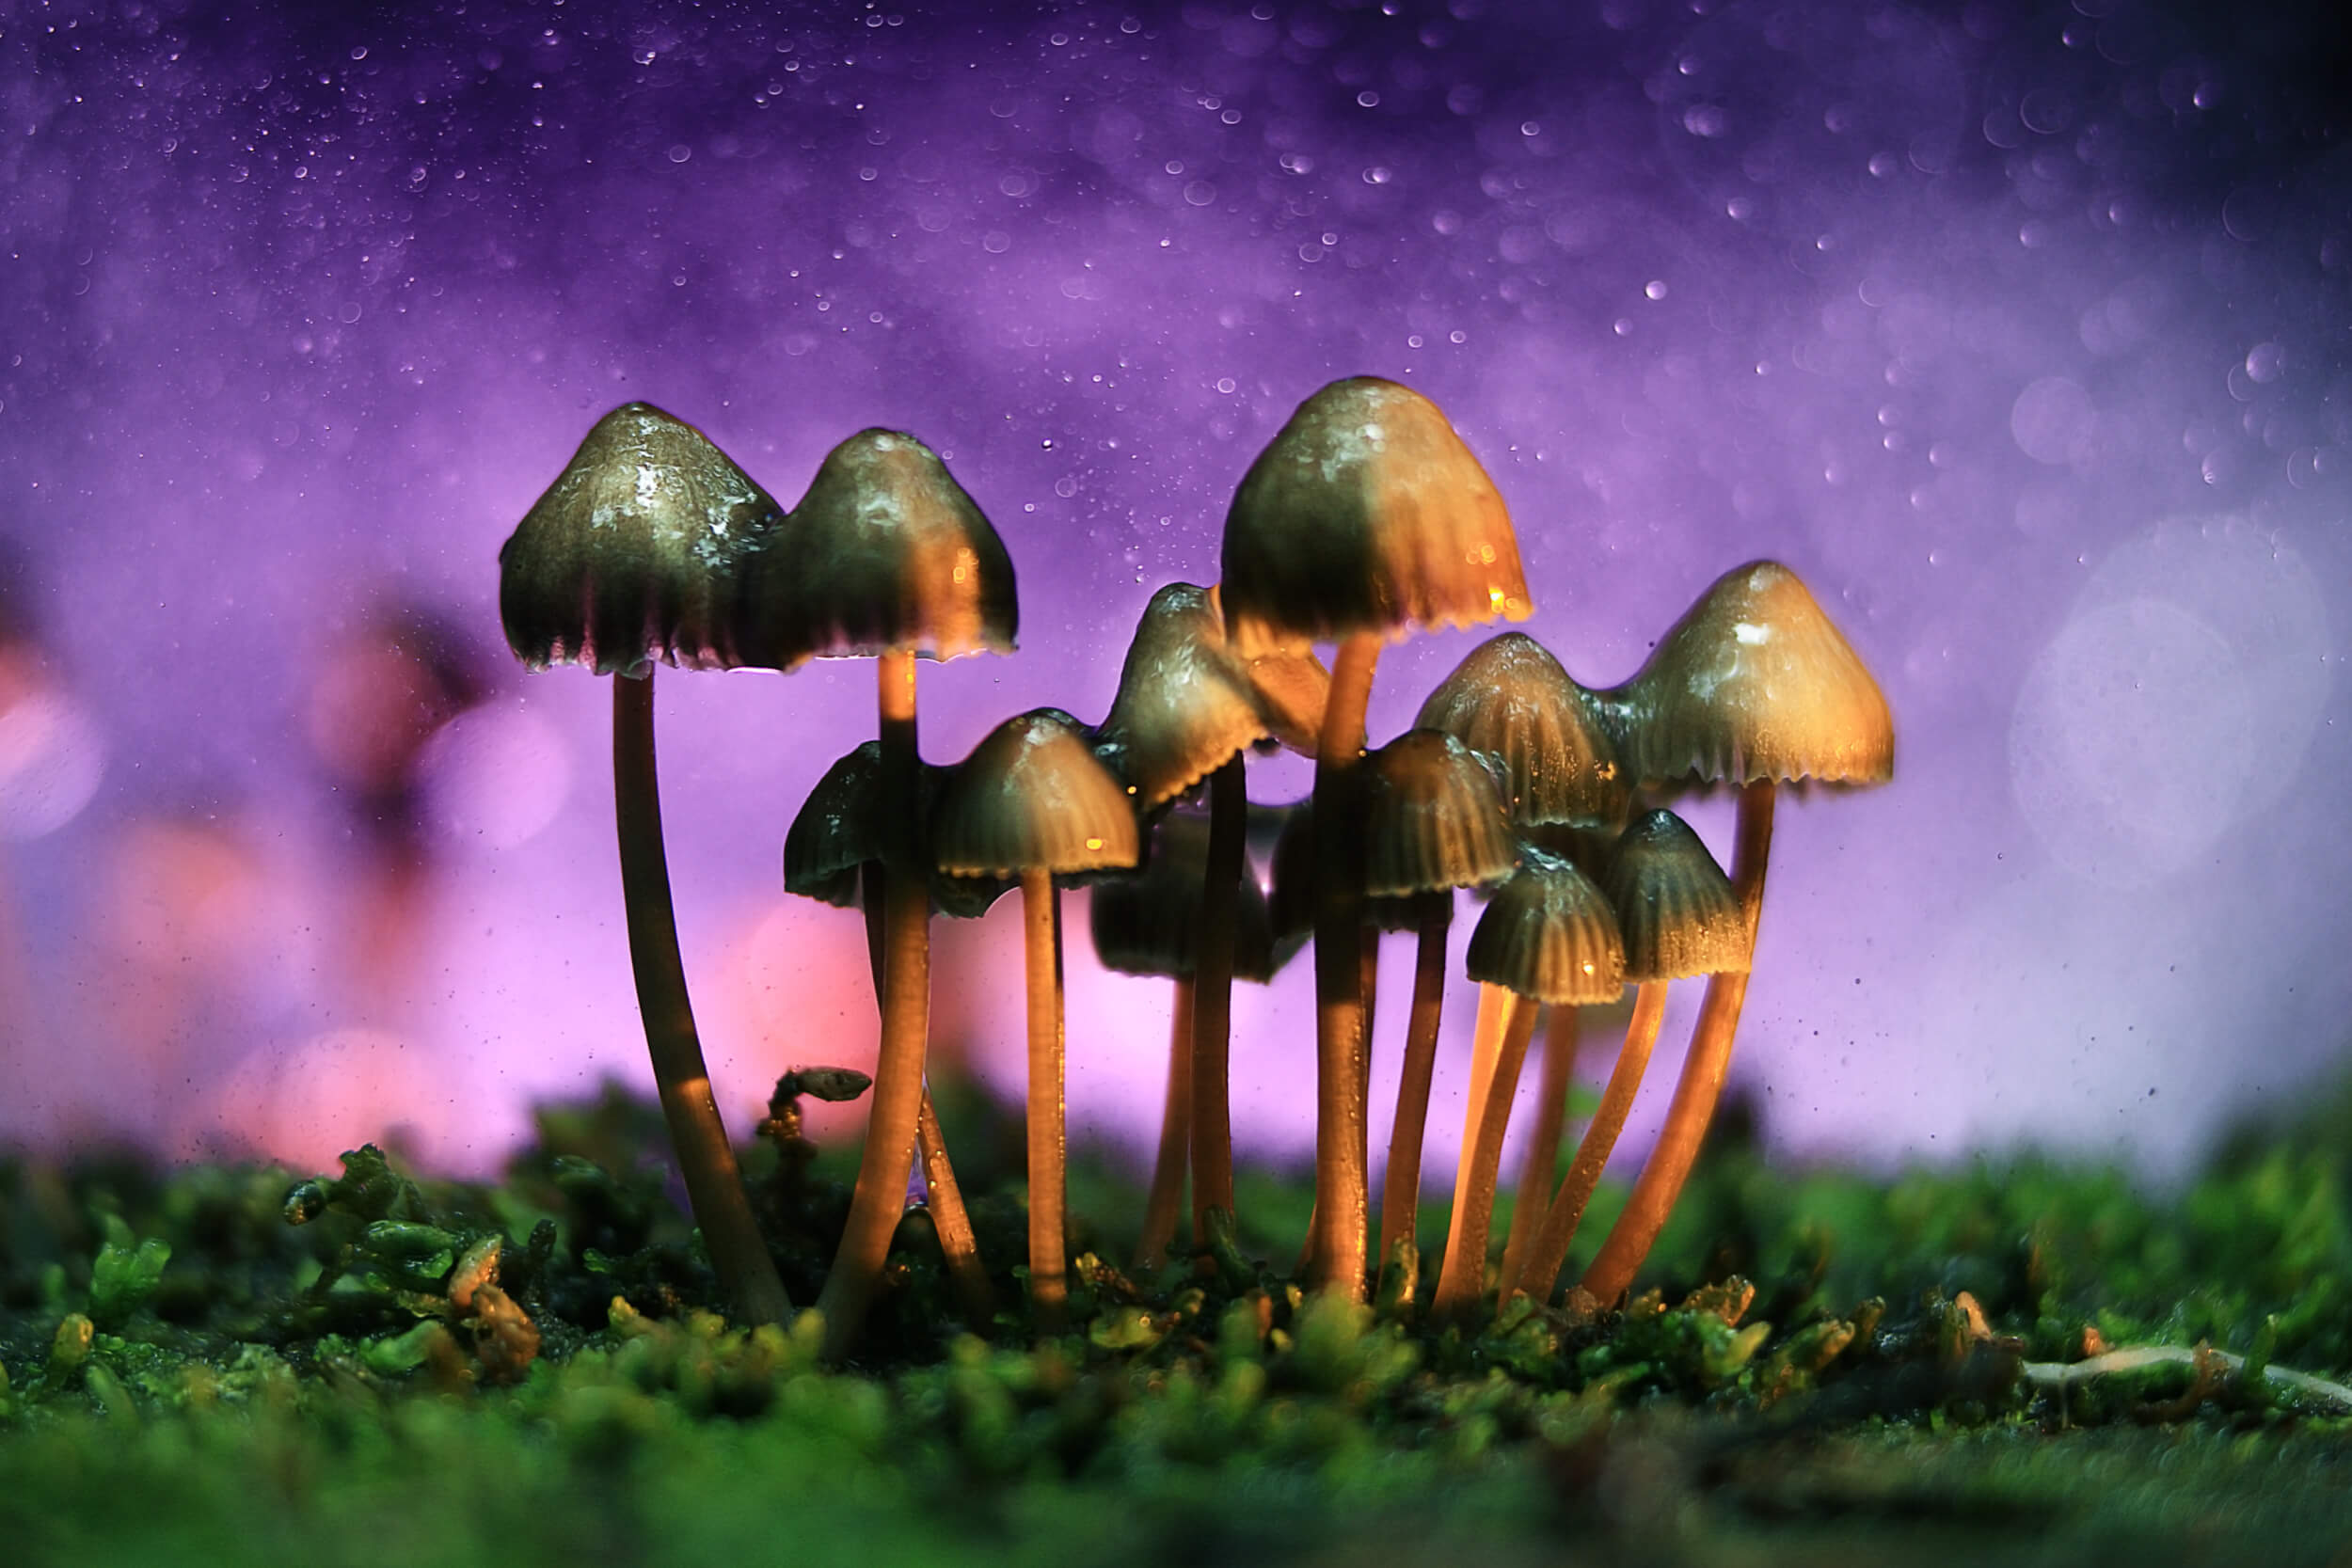 You’re not hallucinating, magic mushrooms could become Colorado’s new societal ill